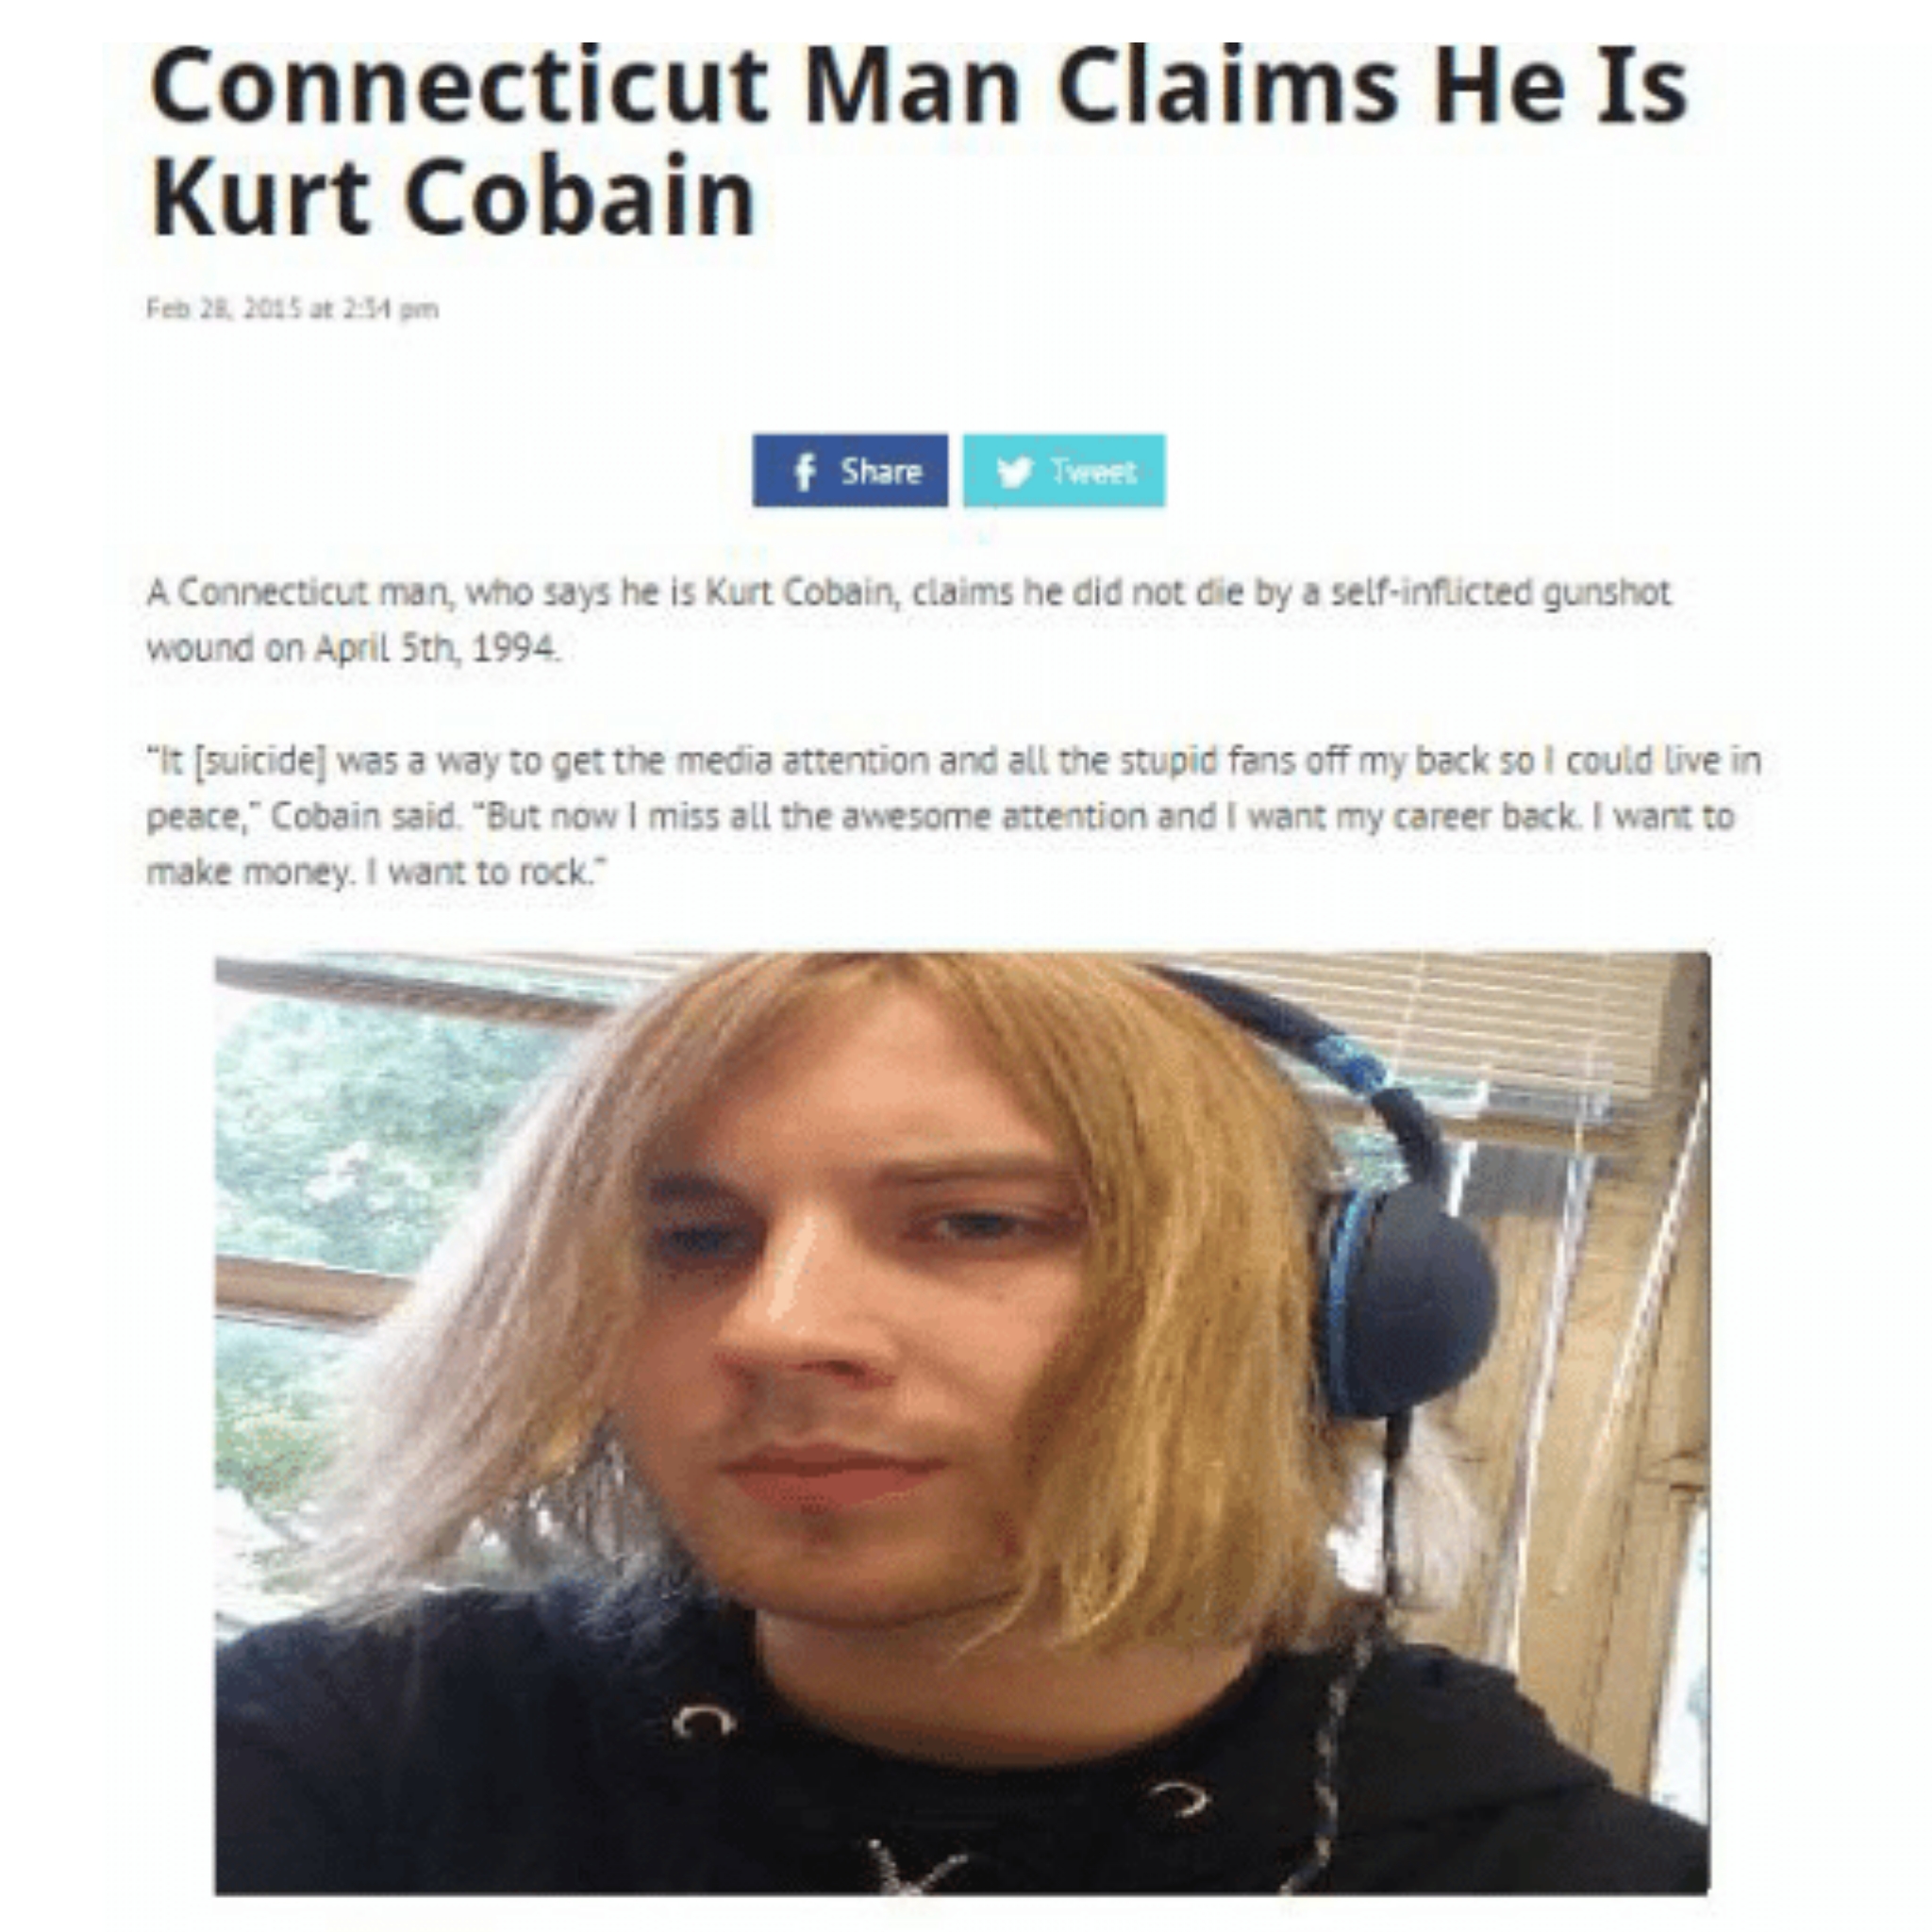 kurt cobain connecticut man - Connecticut Man Claims He Is Kurt Cobain A Connecticut man, who says he is Kurt Cobain, claims he did not die by a selfinflicted gunshot wound on April 5th 1994 "It suicide was a way to get the media attention and all the stu